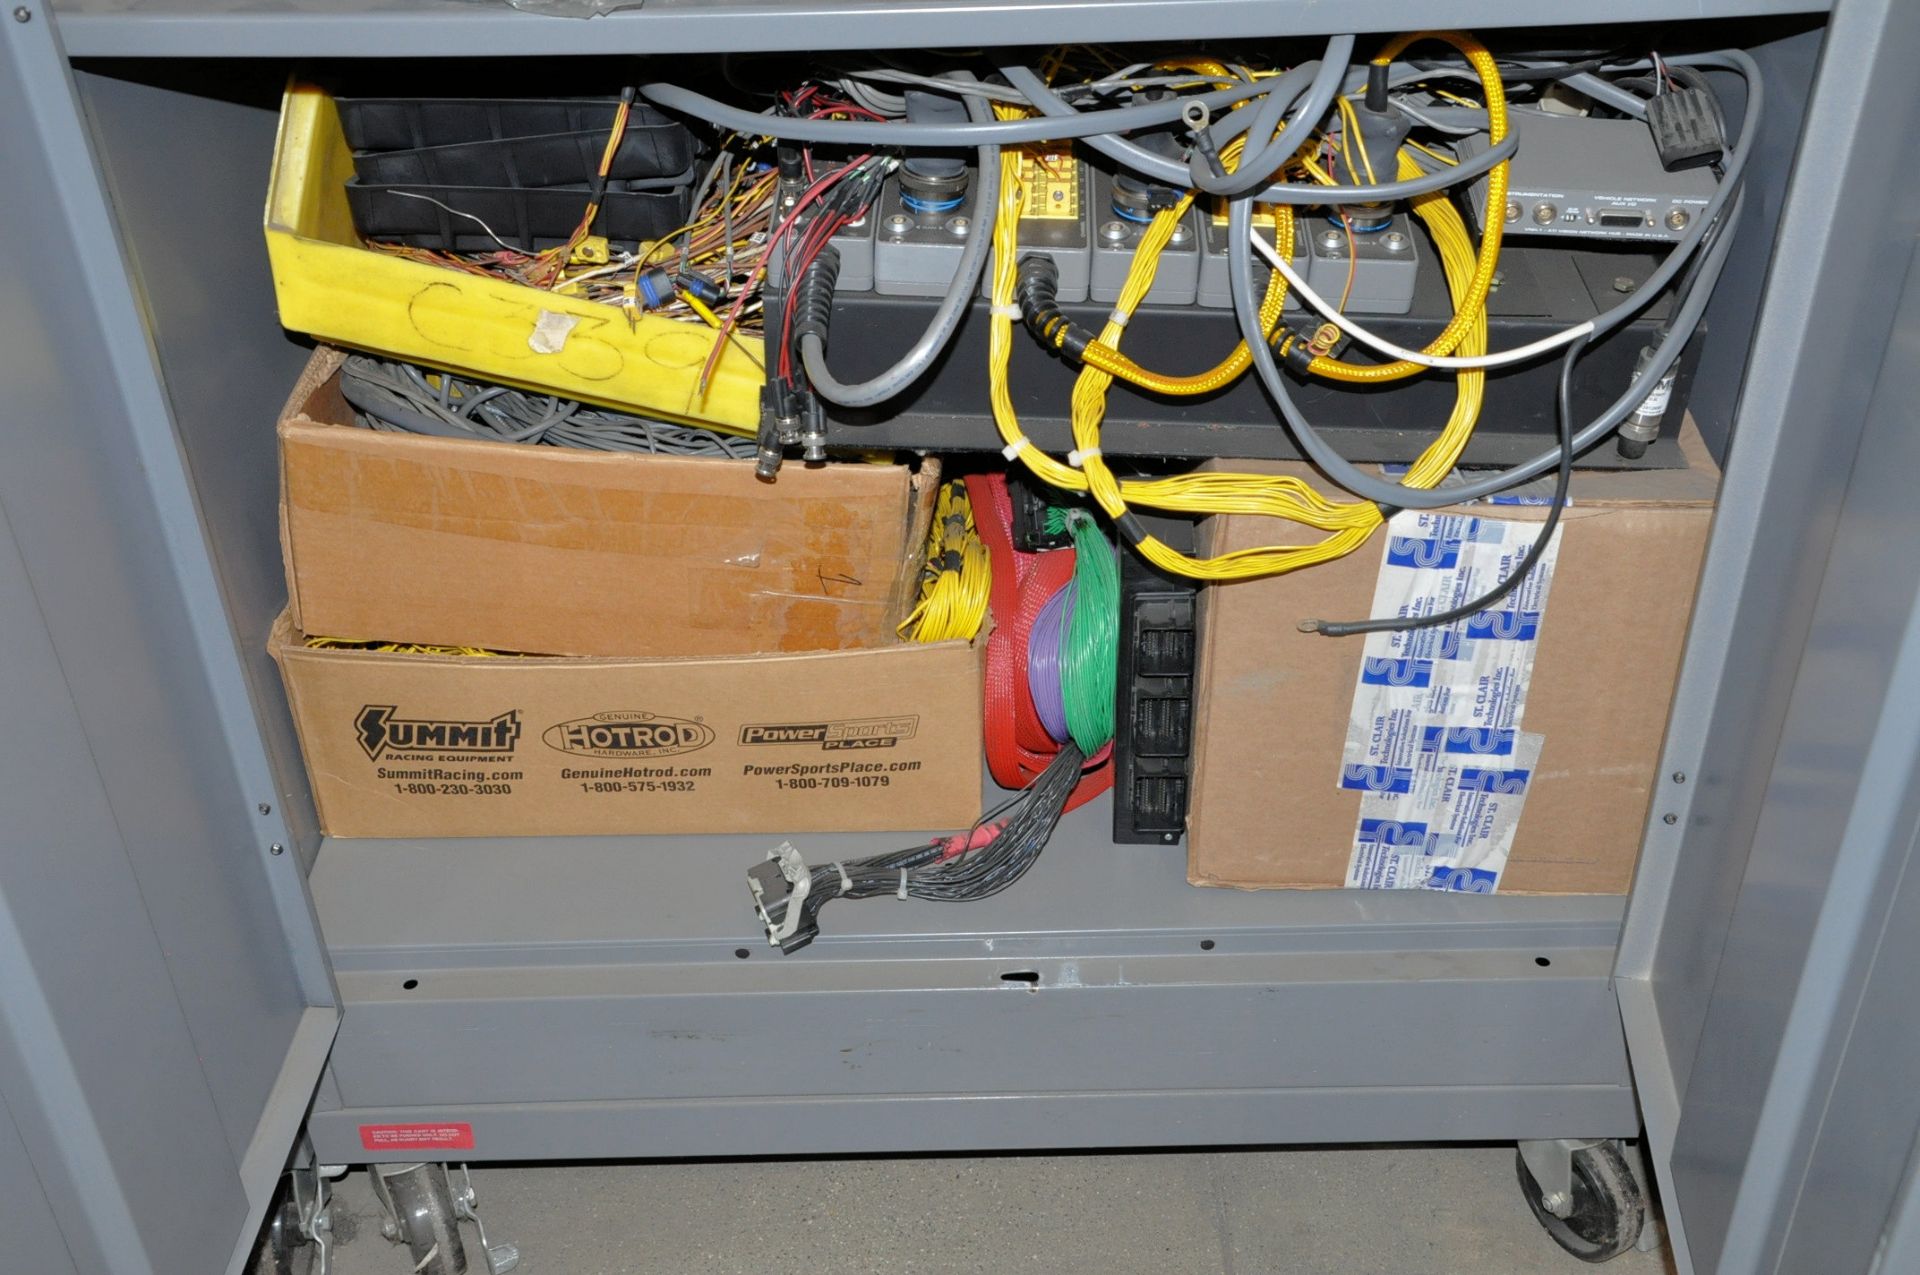 Lot-2 Door Portable Storage Cabinet with Misc. Electrical and Component Contents - Image 5 of 5